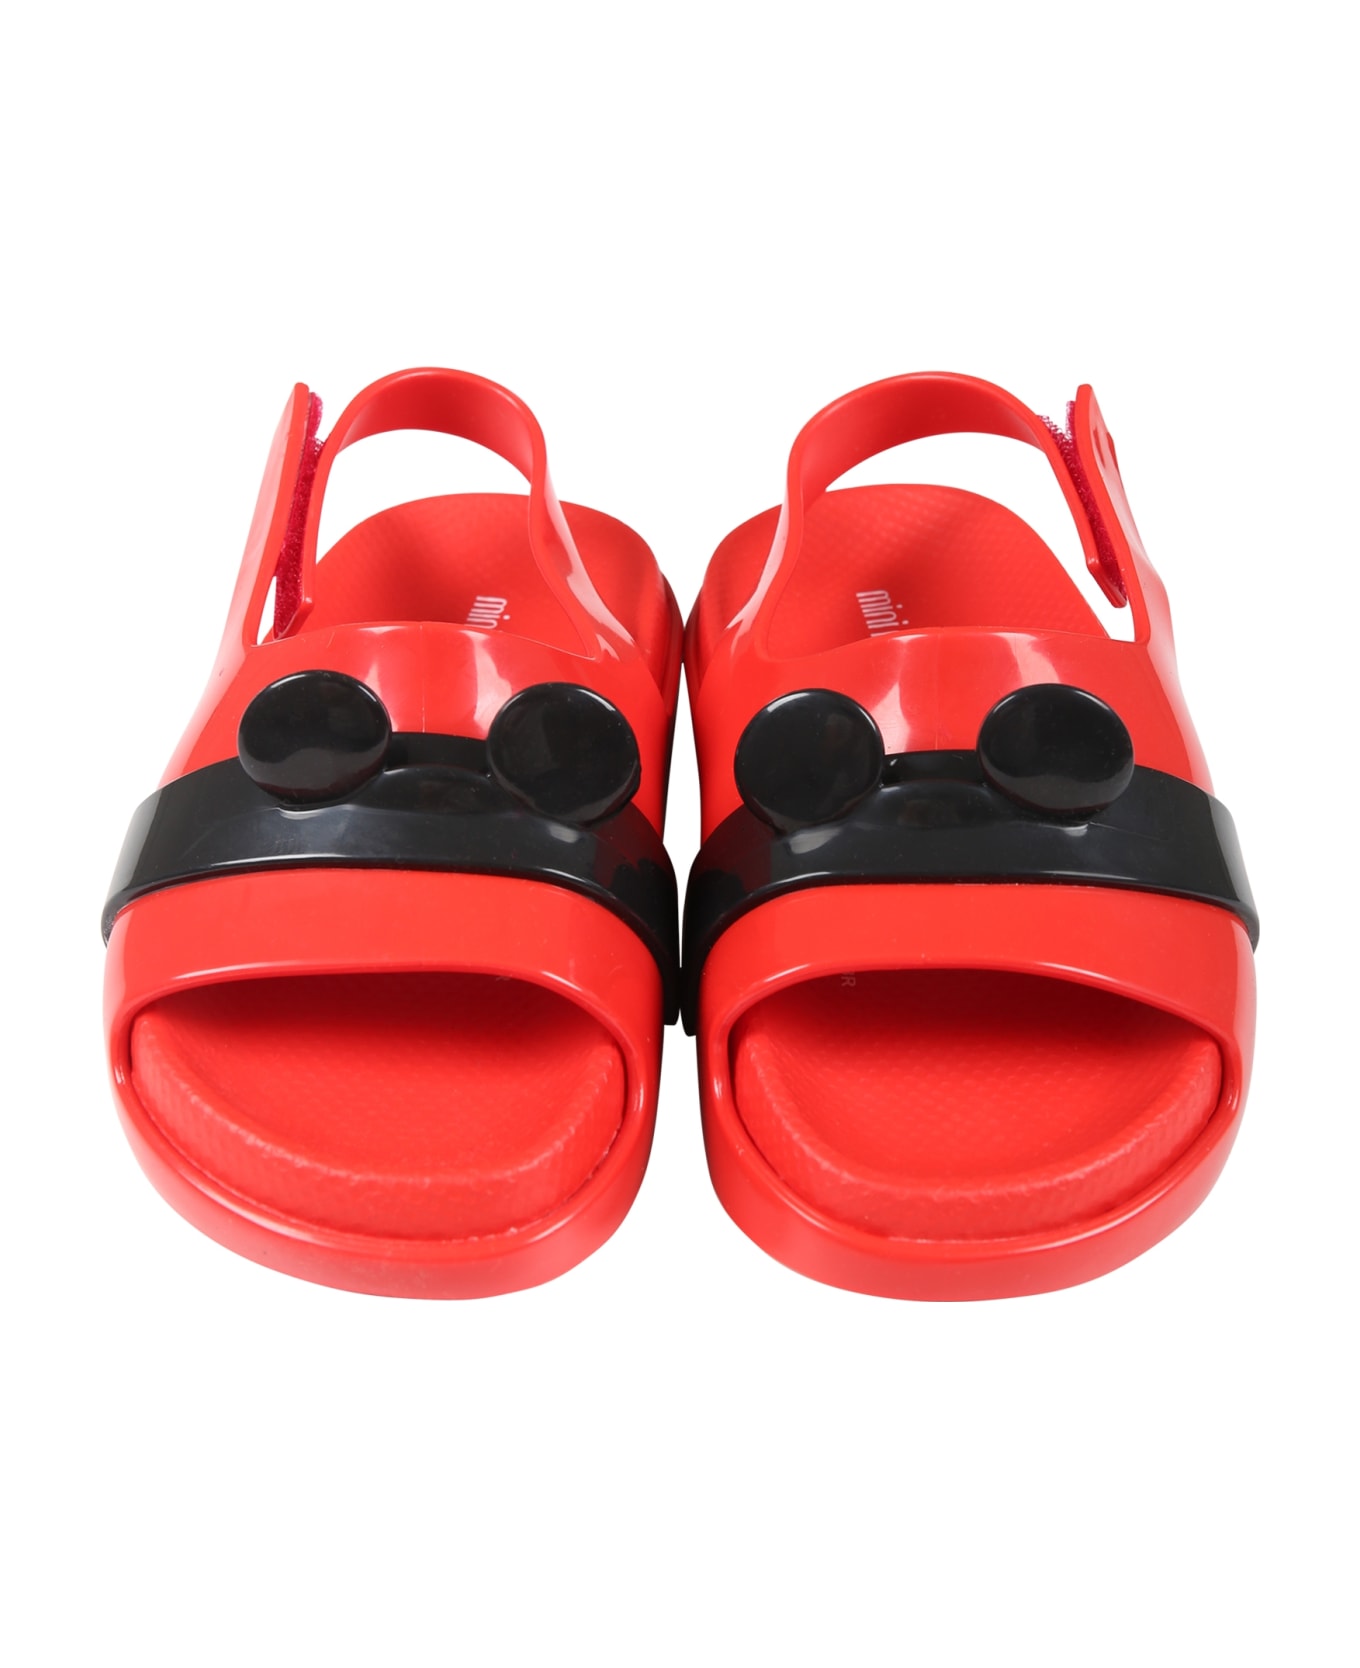 Melissa Red Sandals For Kids With Micki Mouse Ears - Red シューズ